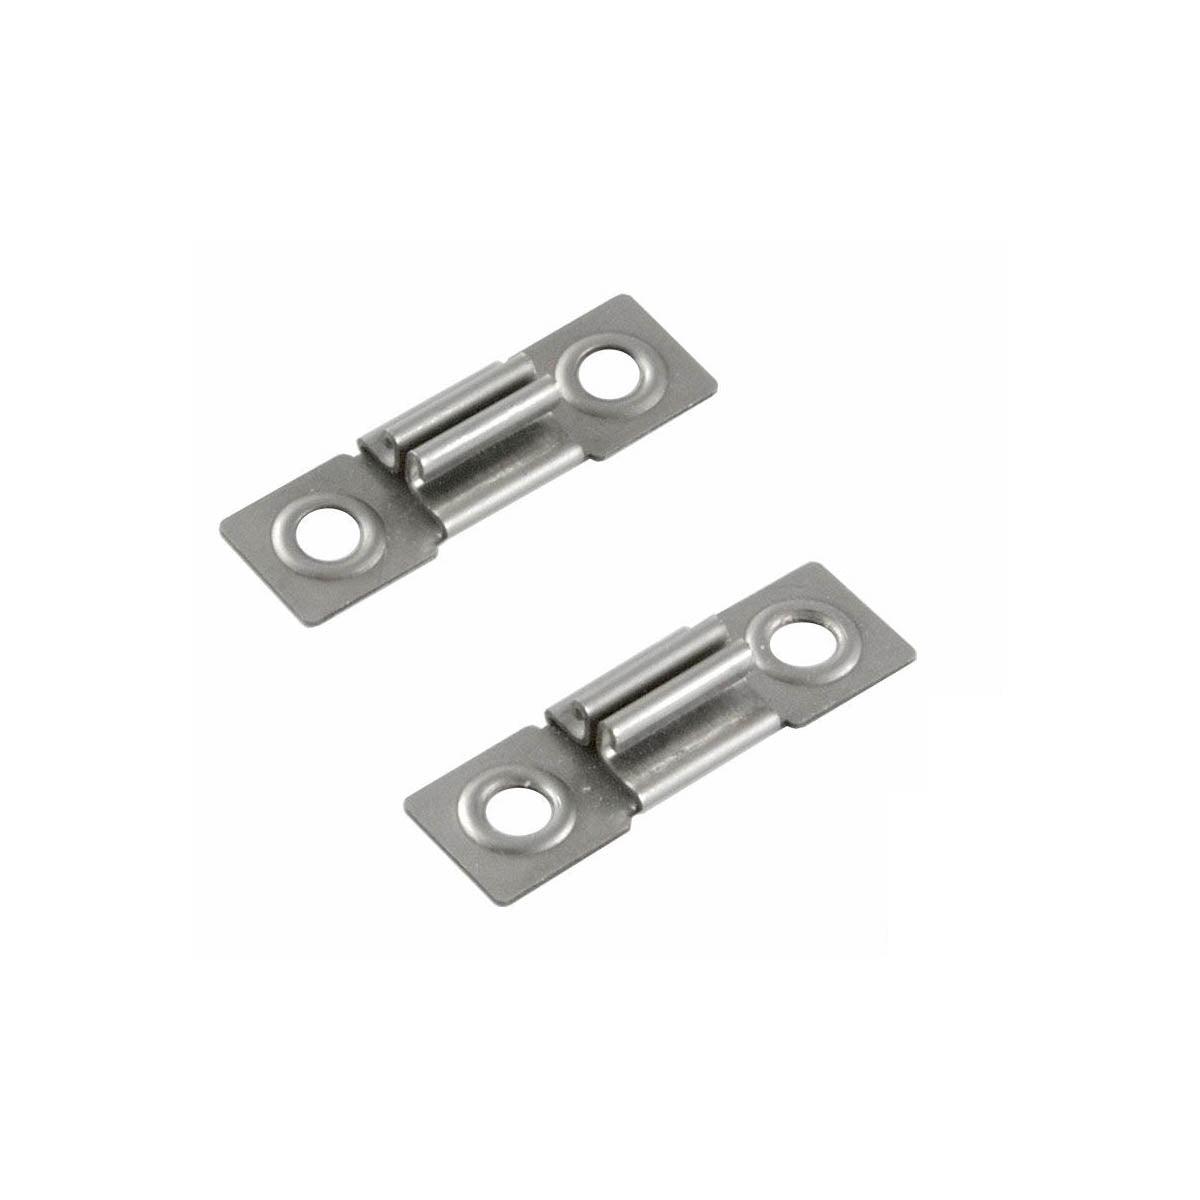 Chromapath Standard Mounting Clips for Square, 45°, and DUO Channels, Pack of 2